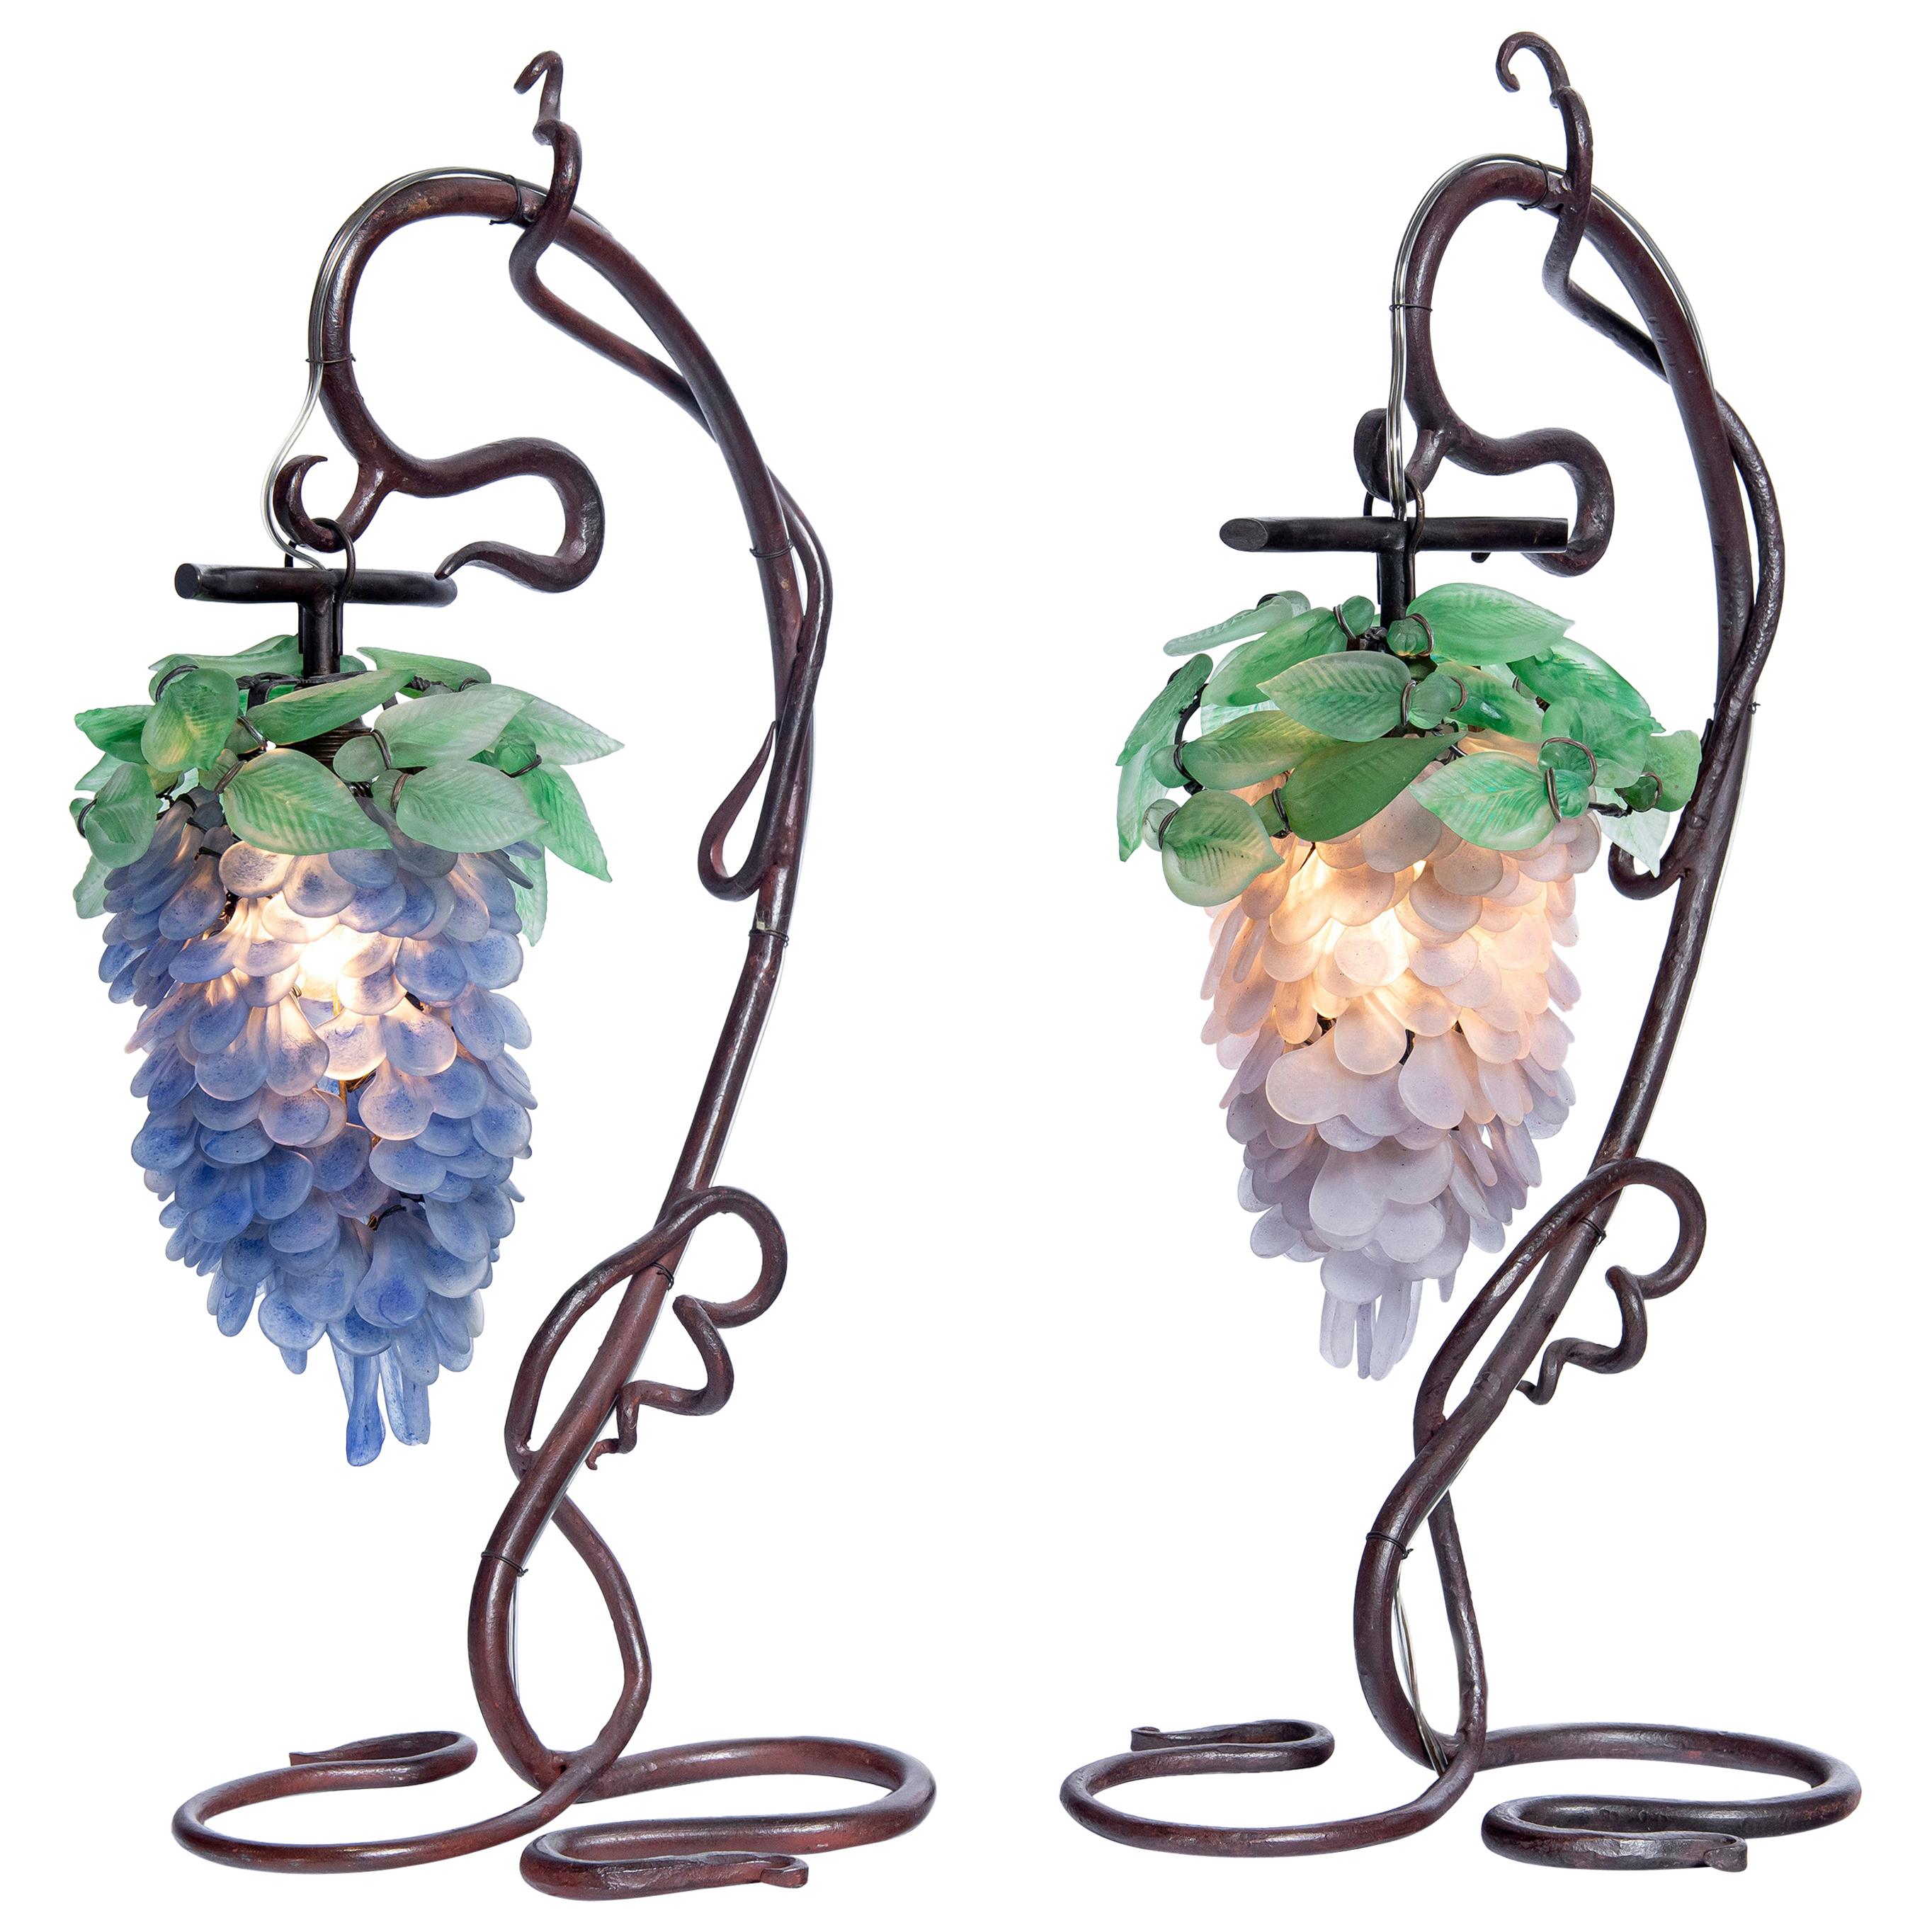 Pair of Iron and Venetian Glass Table Lamps, Italy, circa 1900